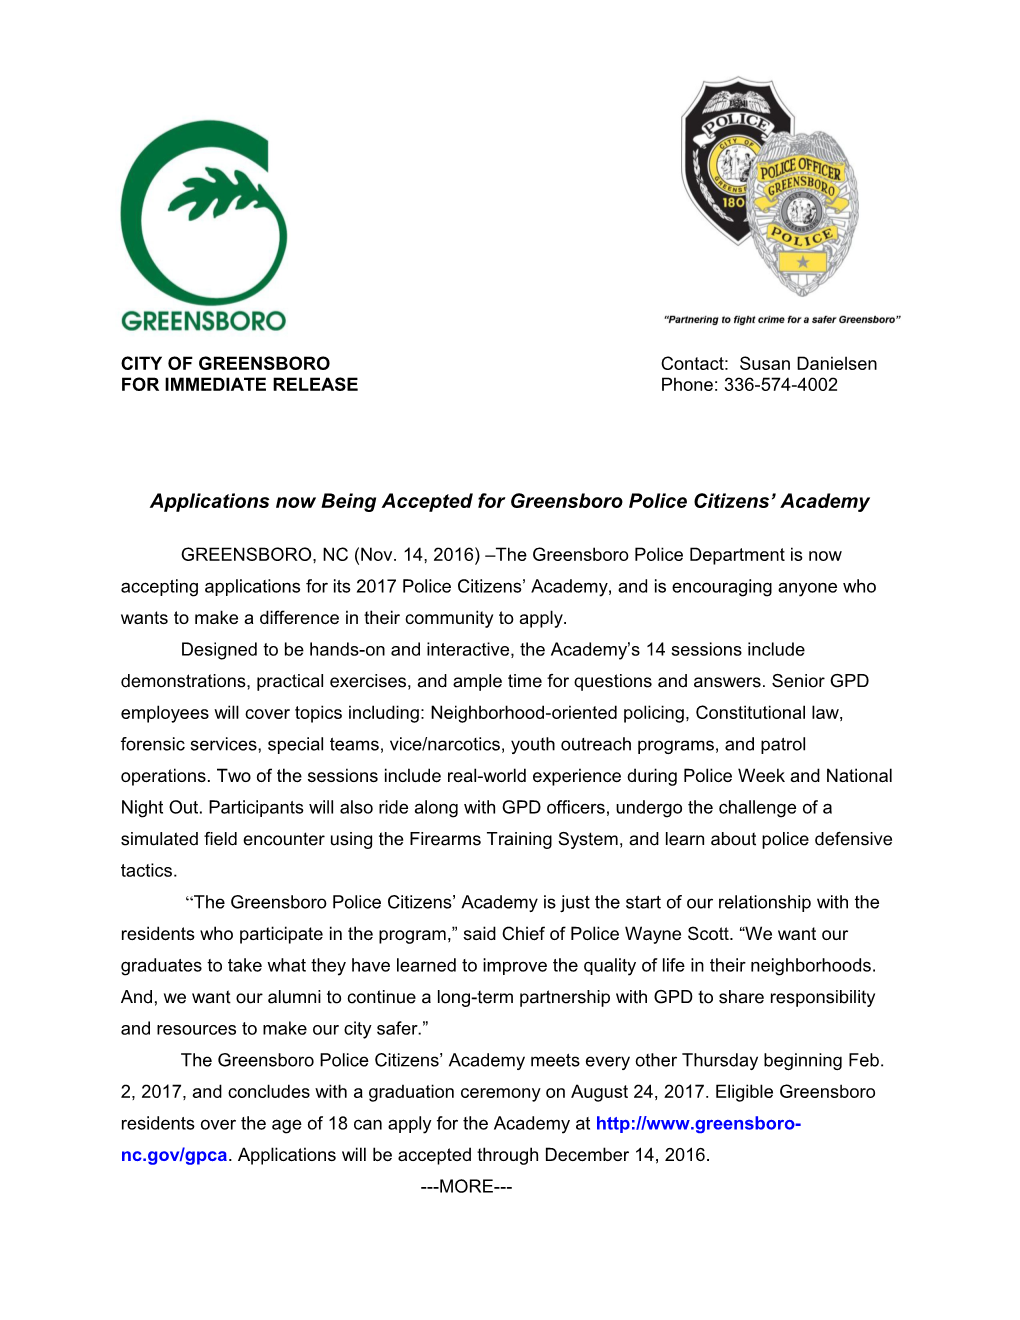 Applications Now Being Accepted for Greensboro Police Citizens Academy